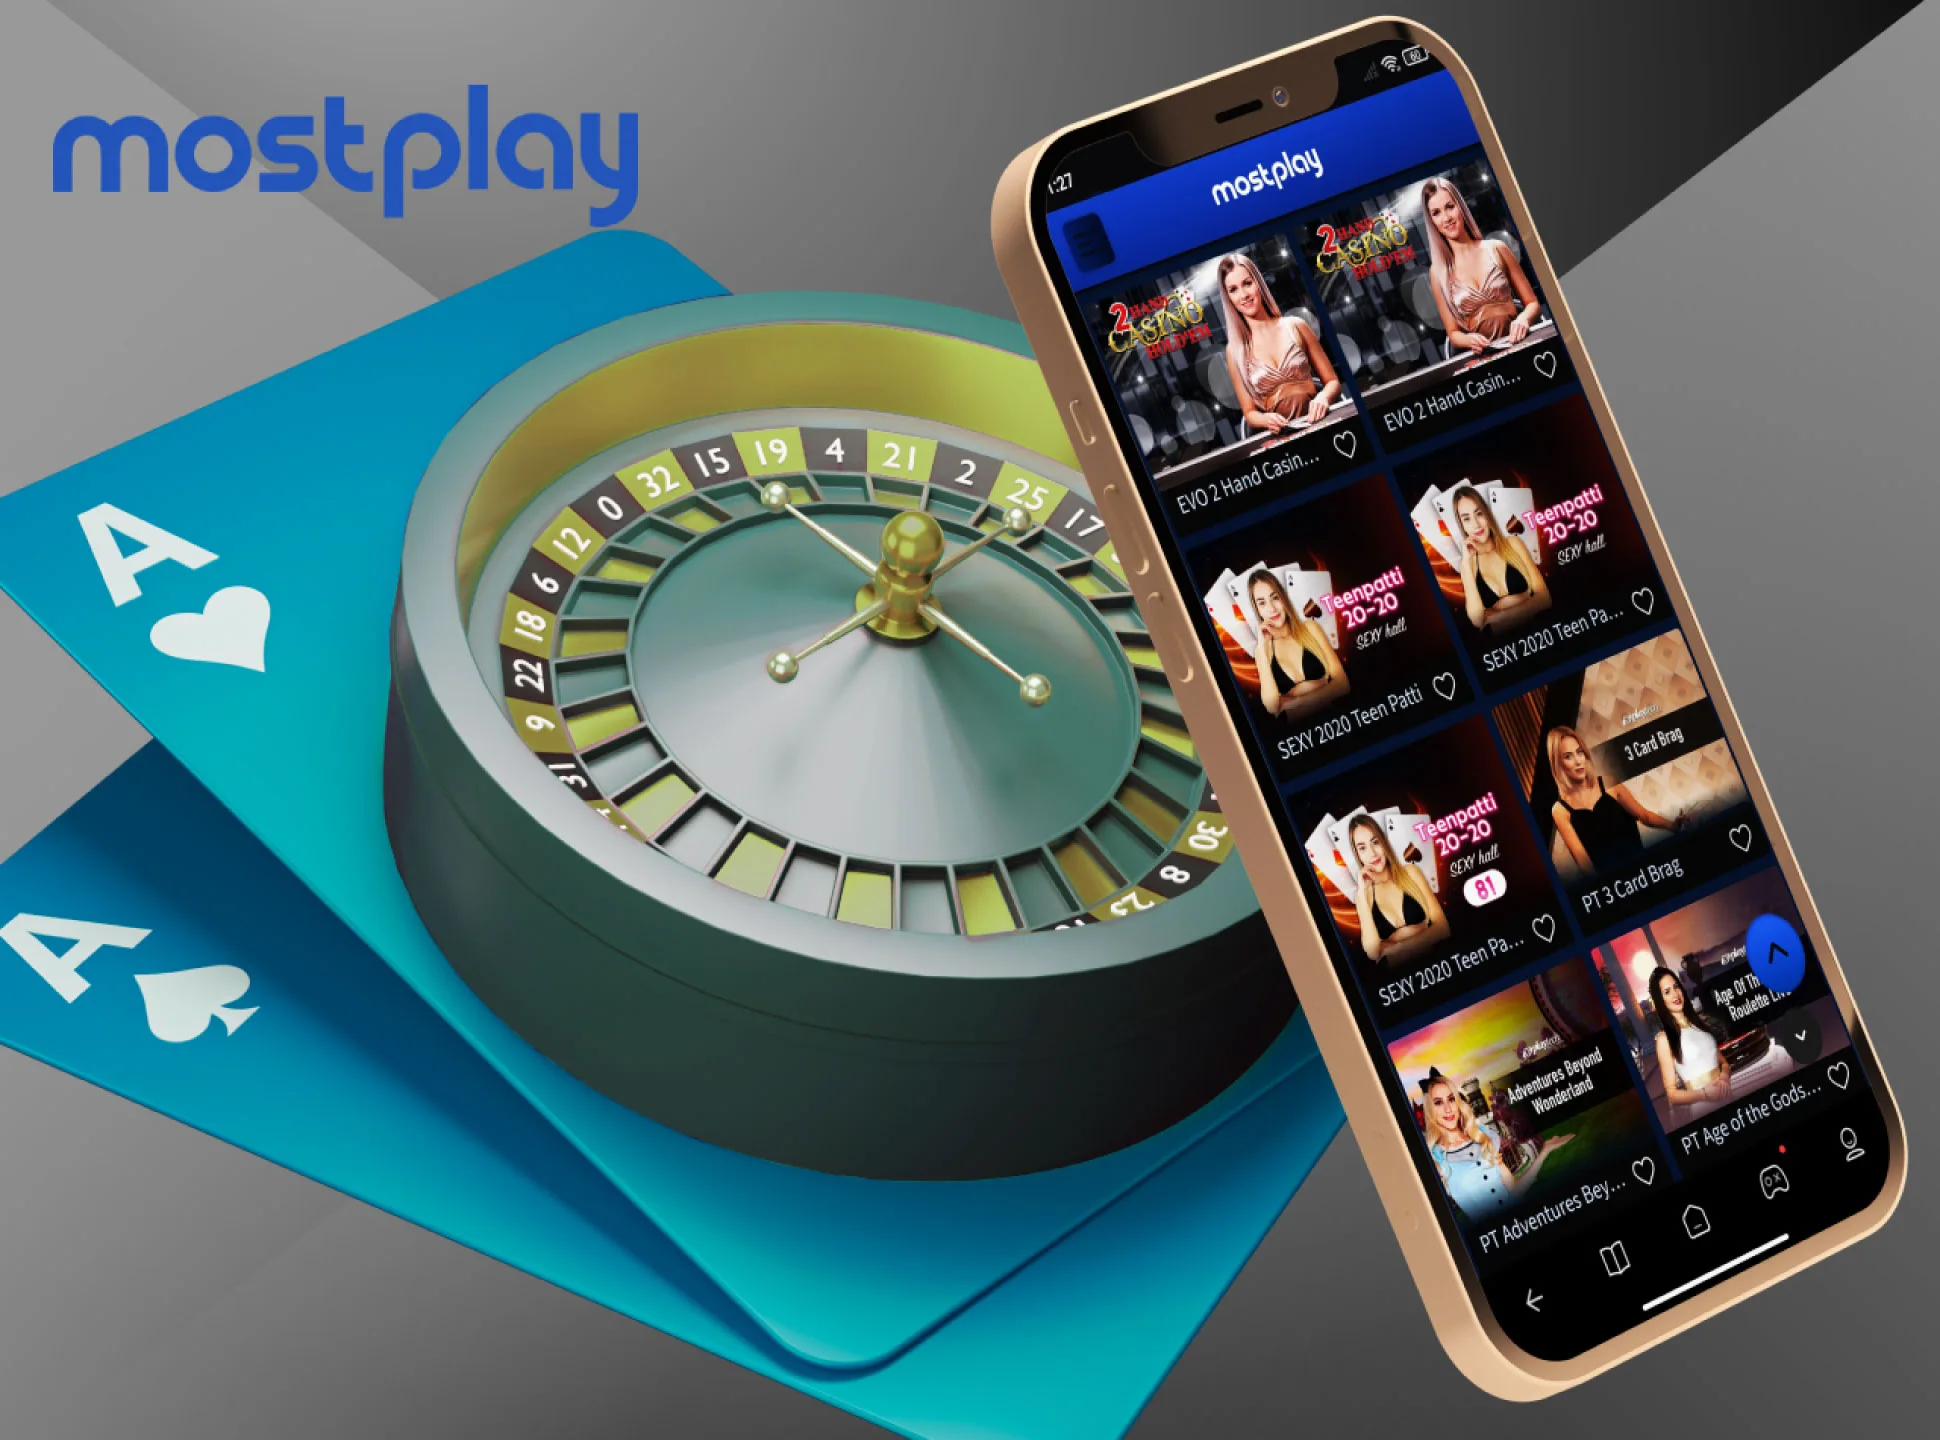 Fair odds are available, which increases the chances of success on the Mostplay platform.